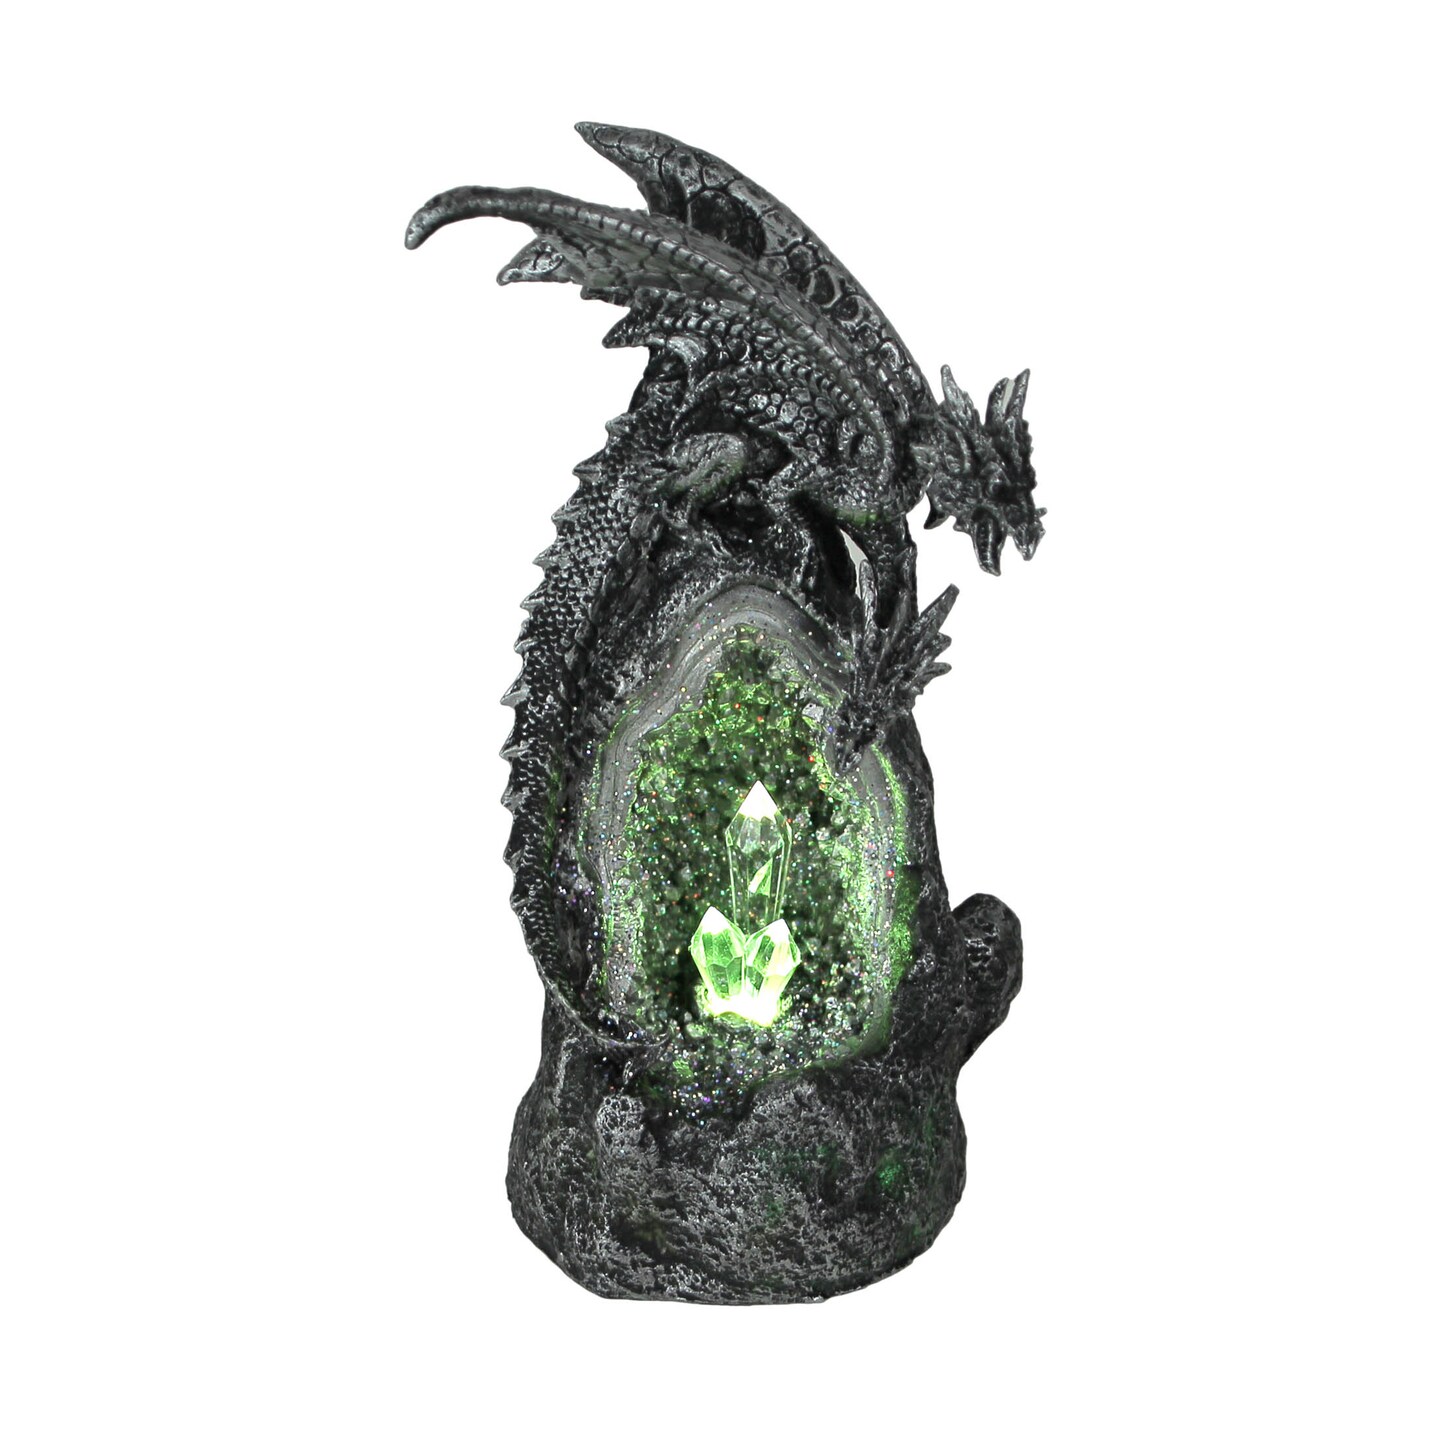 Silver / Black Two Headed Dragon On LED Geode Crystal Stone Statue